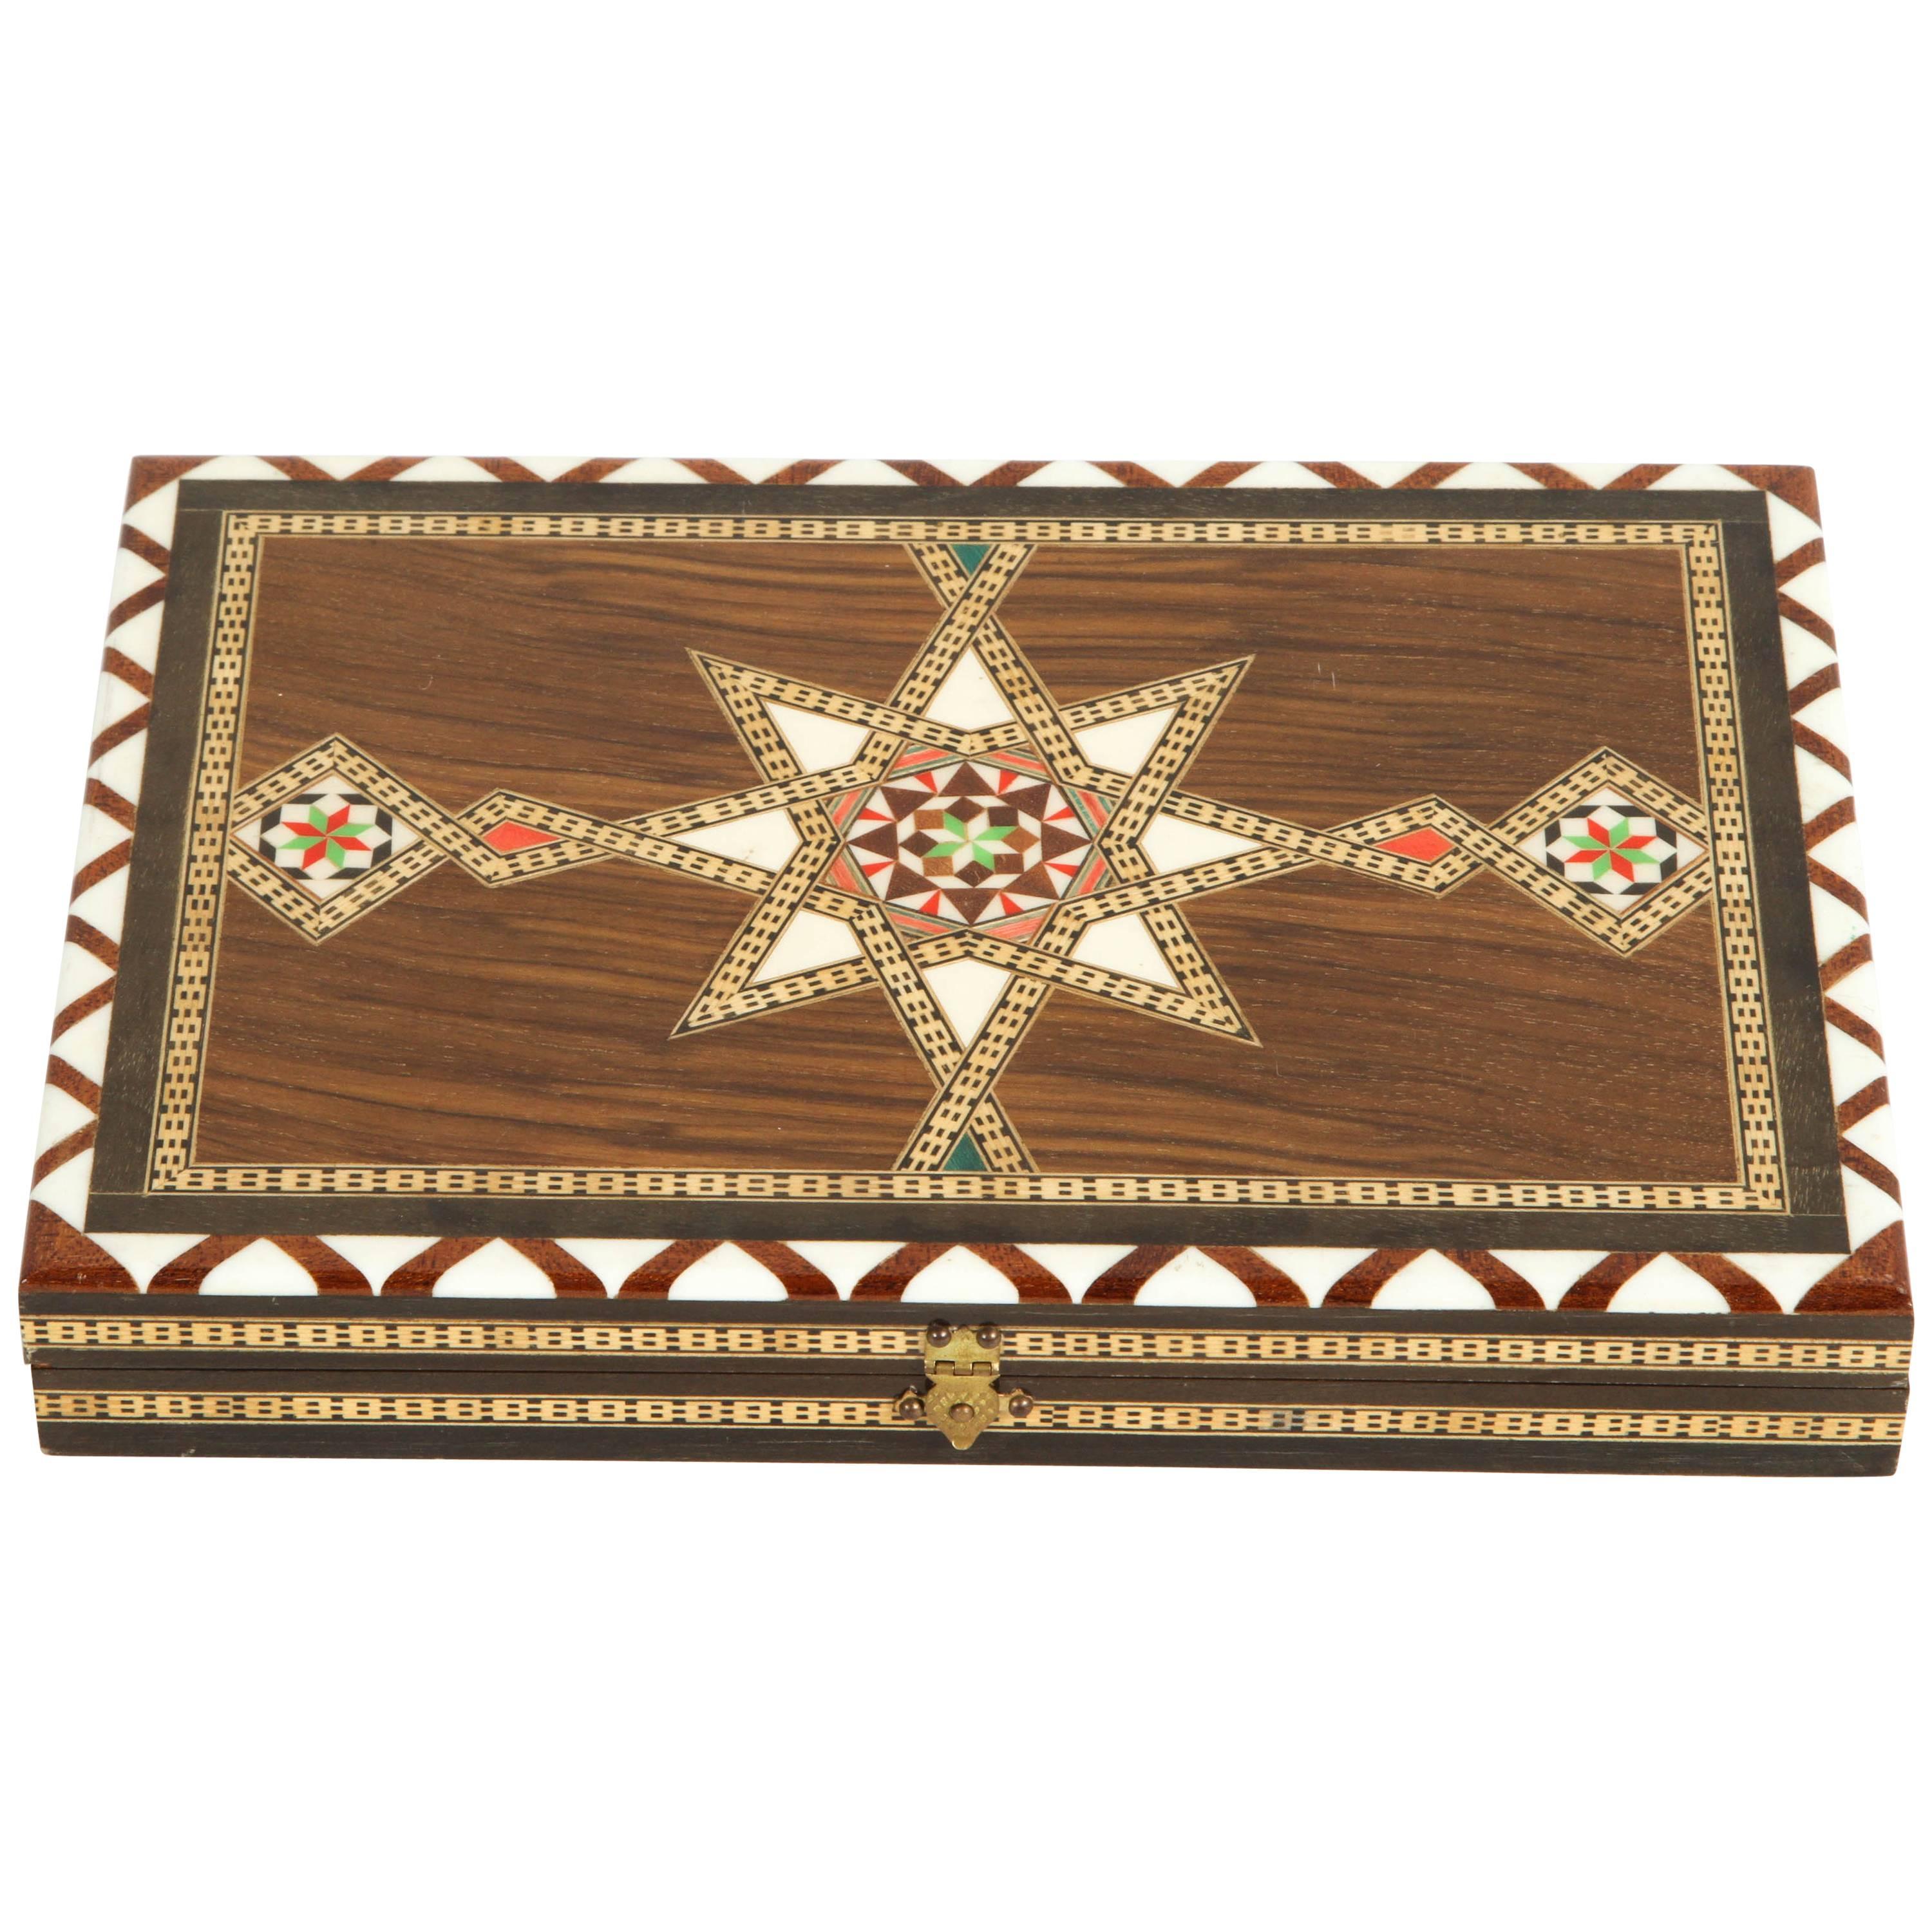 Middle Eastern Syrian Inlaid Backgammon Game